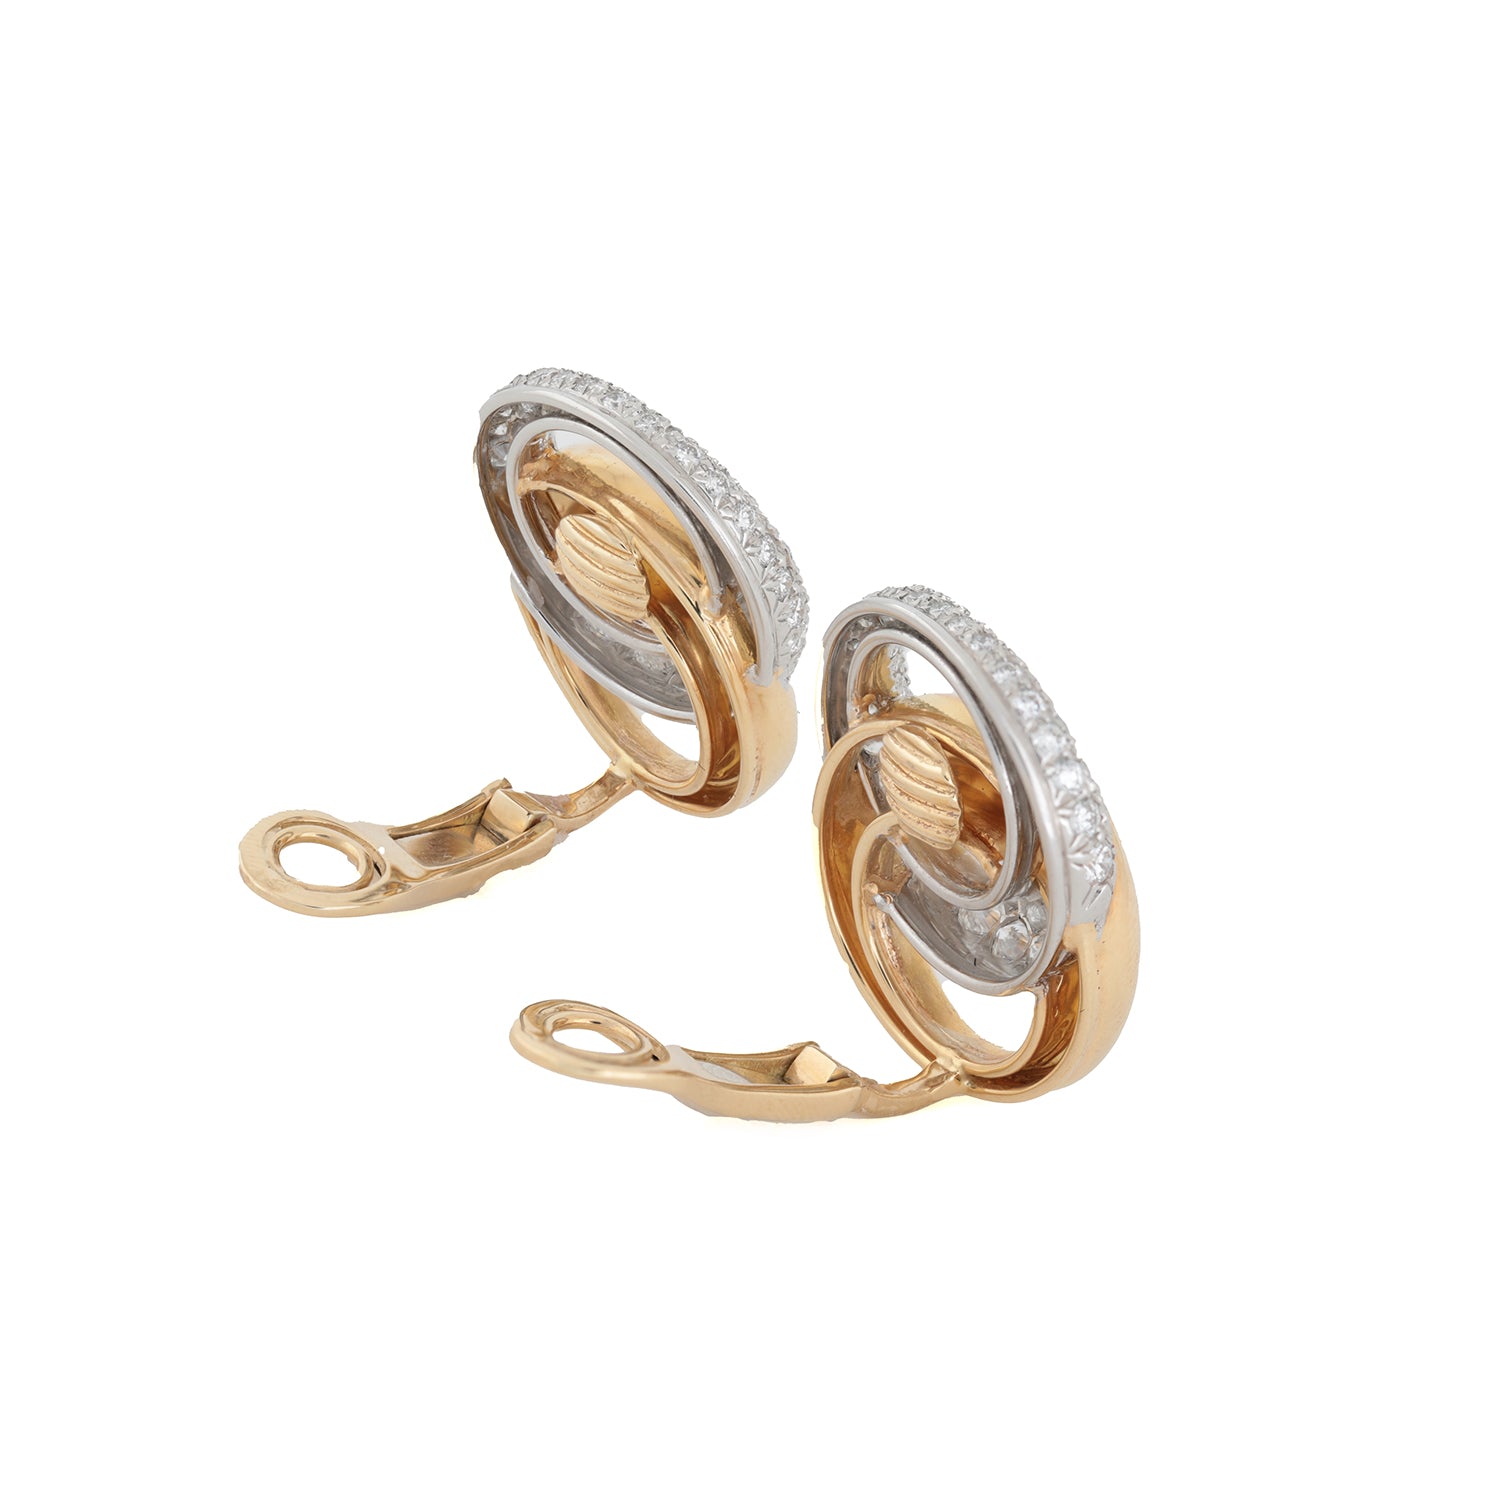 Exquisite gold-tone earrings with diamond-like accents showcase elegance and craftsmanship.